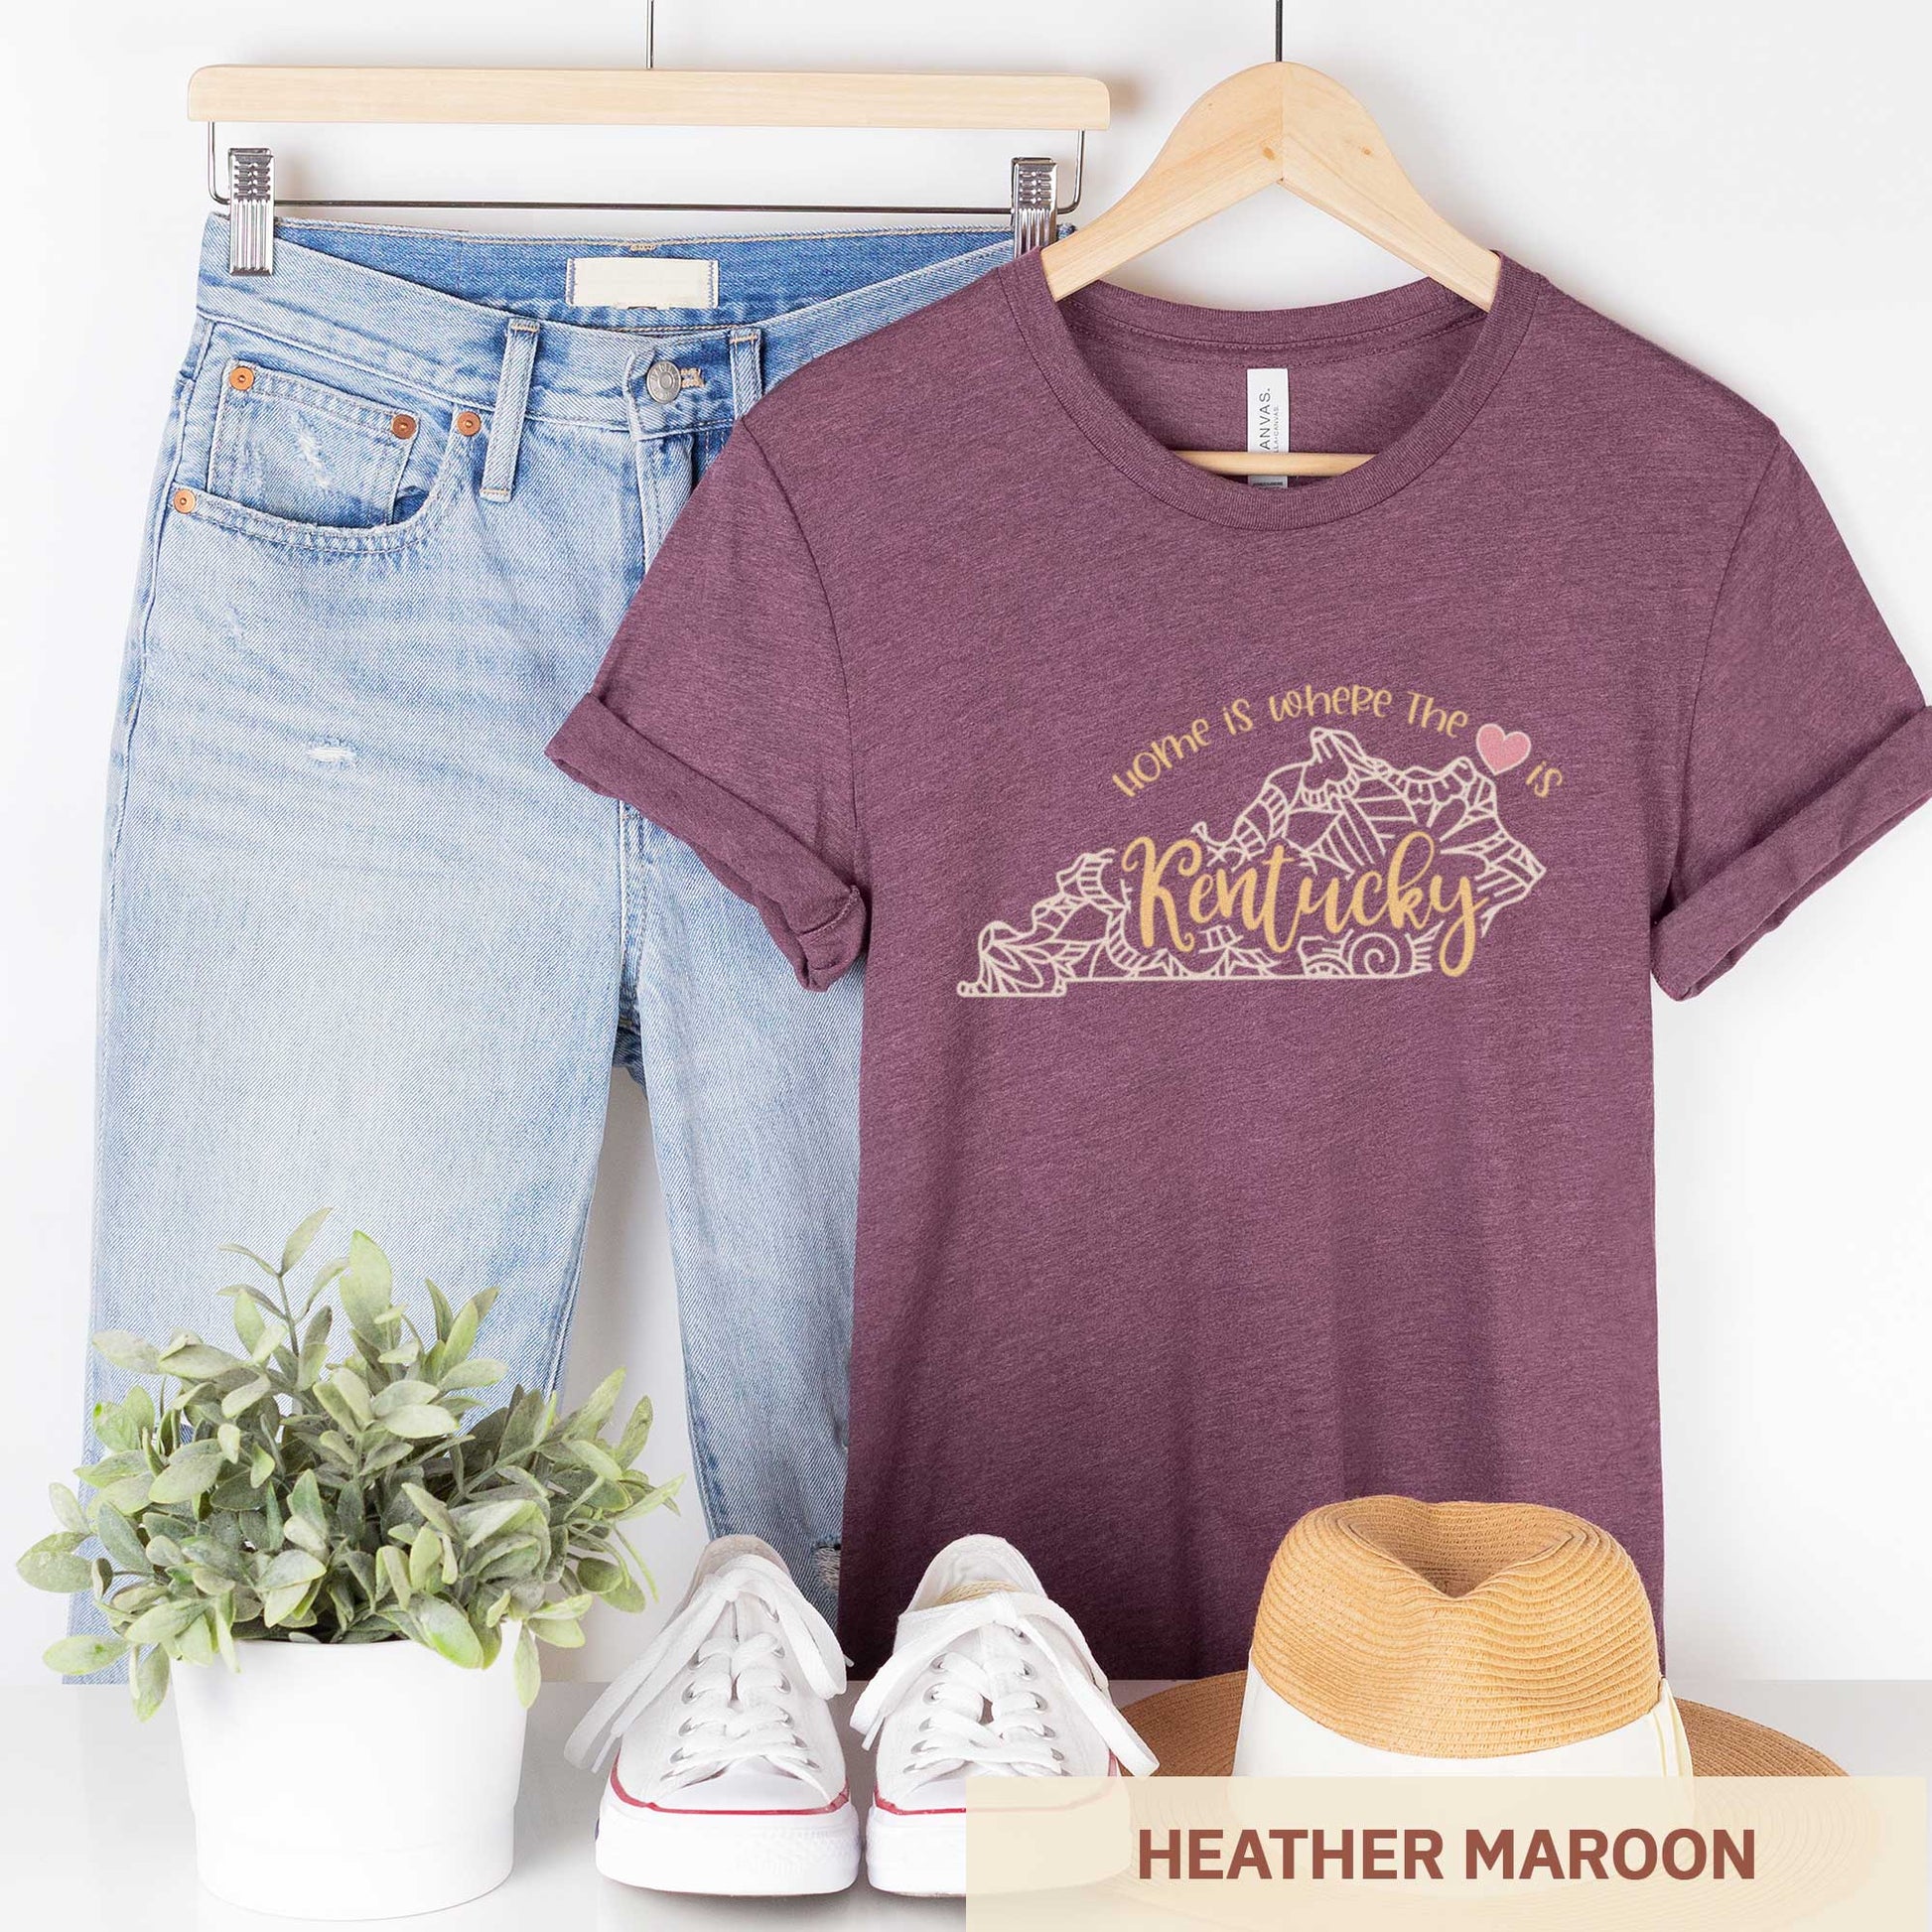 A hanging heather maroon Bella Canvas t-shirt featuring a mandala in the shape of Kentucky with the words home is where the heart is.